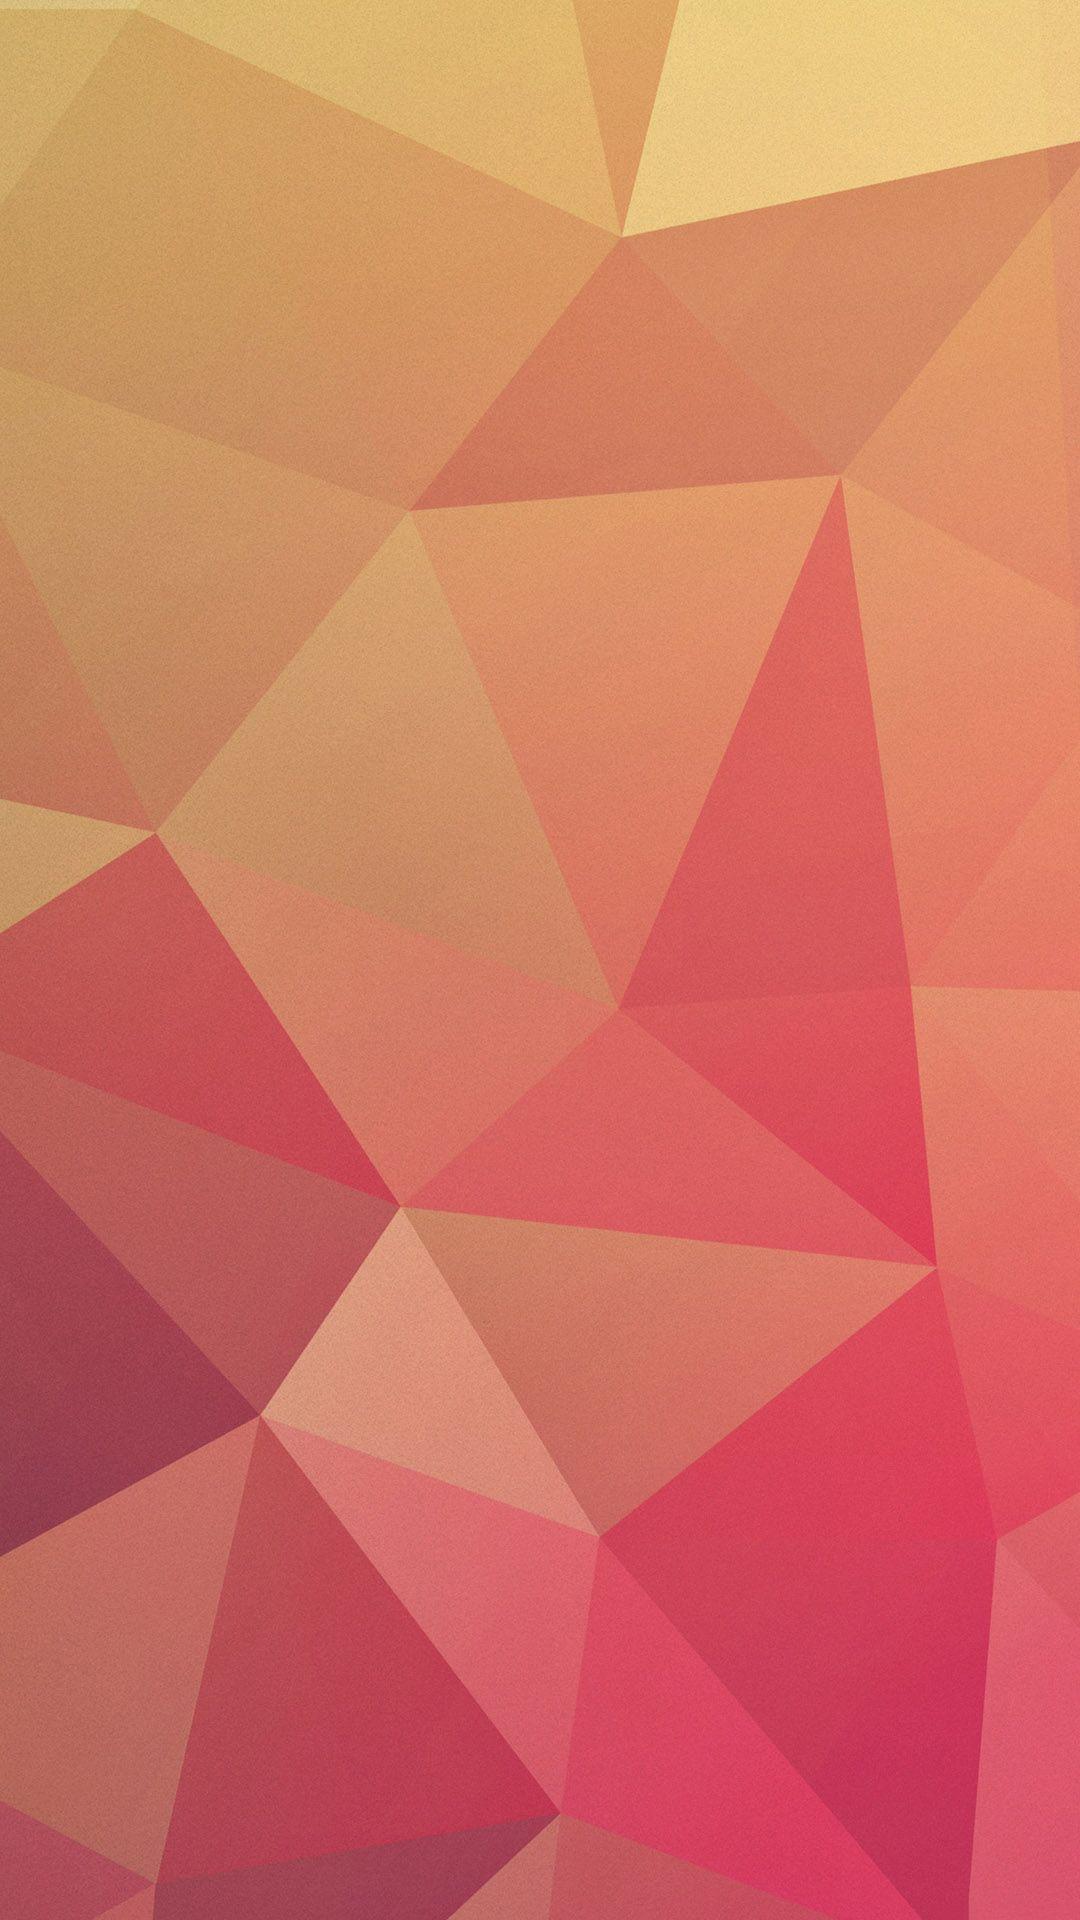 1080 x 1920 · jpeg - Official Nexus 7 3D Android Wallpaper free download | Simple phone ...